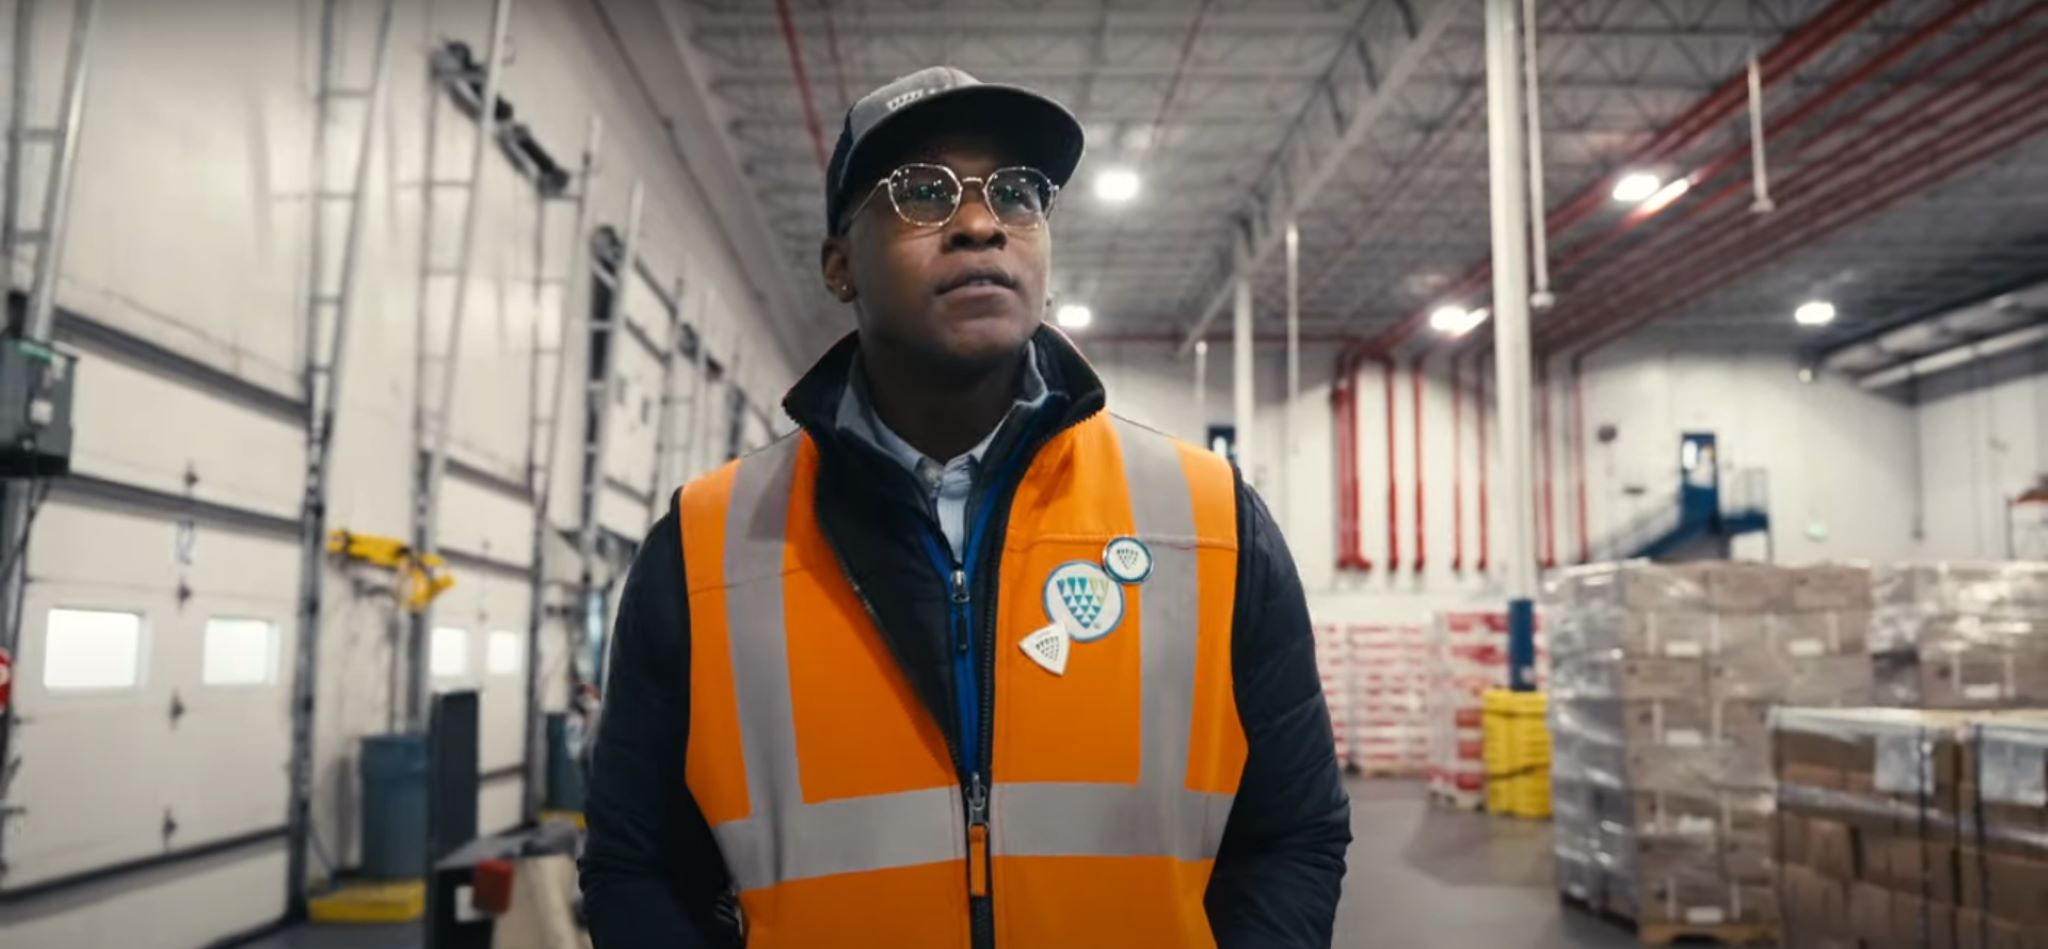 Alt text: "A focused individual, Brandon Richardson, donned in a high-visibility orange safety vest adorned with Lineage Logistics badges, stands proudly inside a vast warehouse. His attire, complete with a smart button-up shirt and stylish glasses, suggests a blend of professionalism and preparedness as he embarks on his journey through the Lineage Management Program. The background blur underscores the bustling environment of the warehouse, indicative of the dynamic workplace Lineage offers.